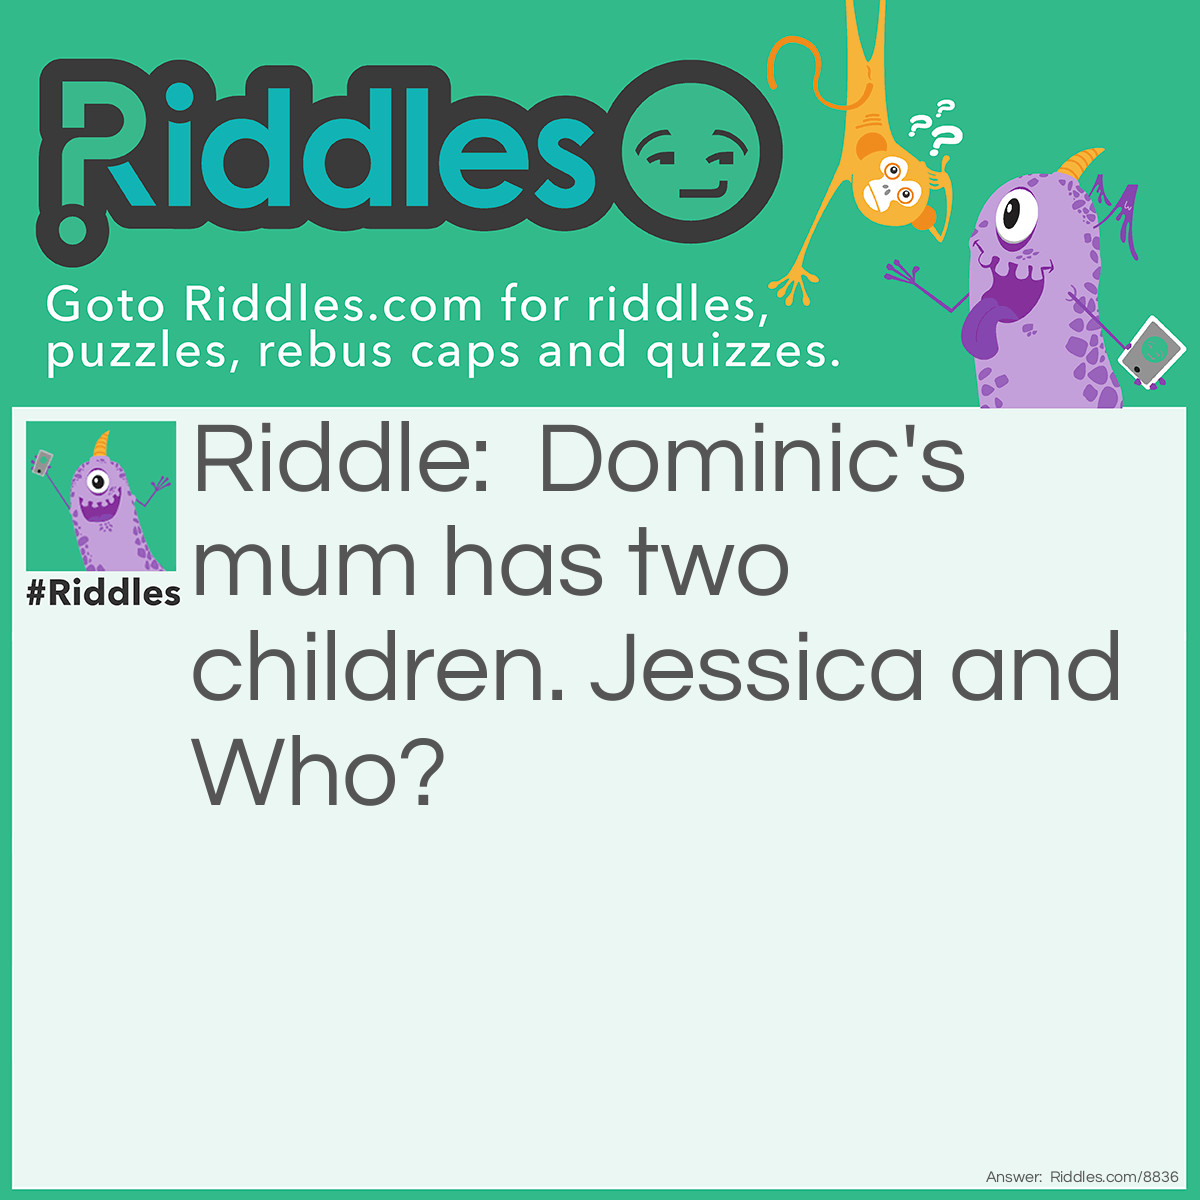 Riddle: Dominic's mum has two children. Jessica and Who? Answer: Dominic!